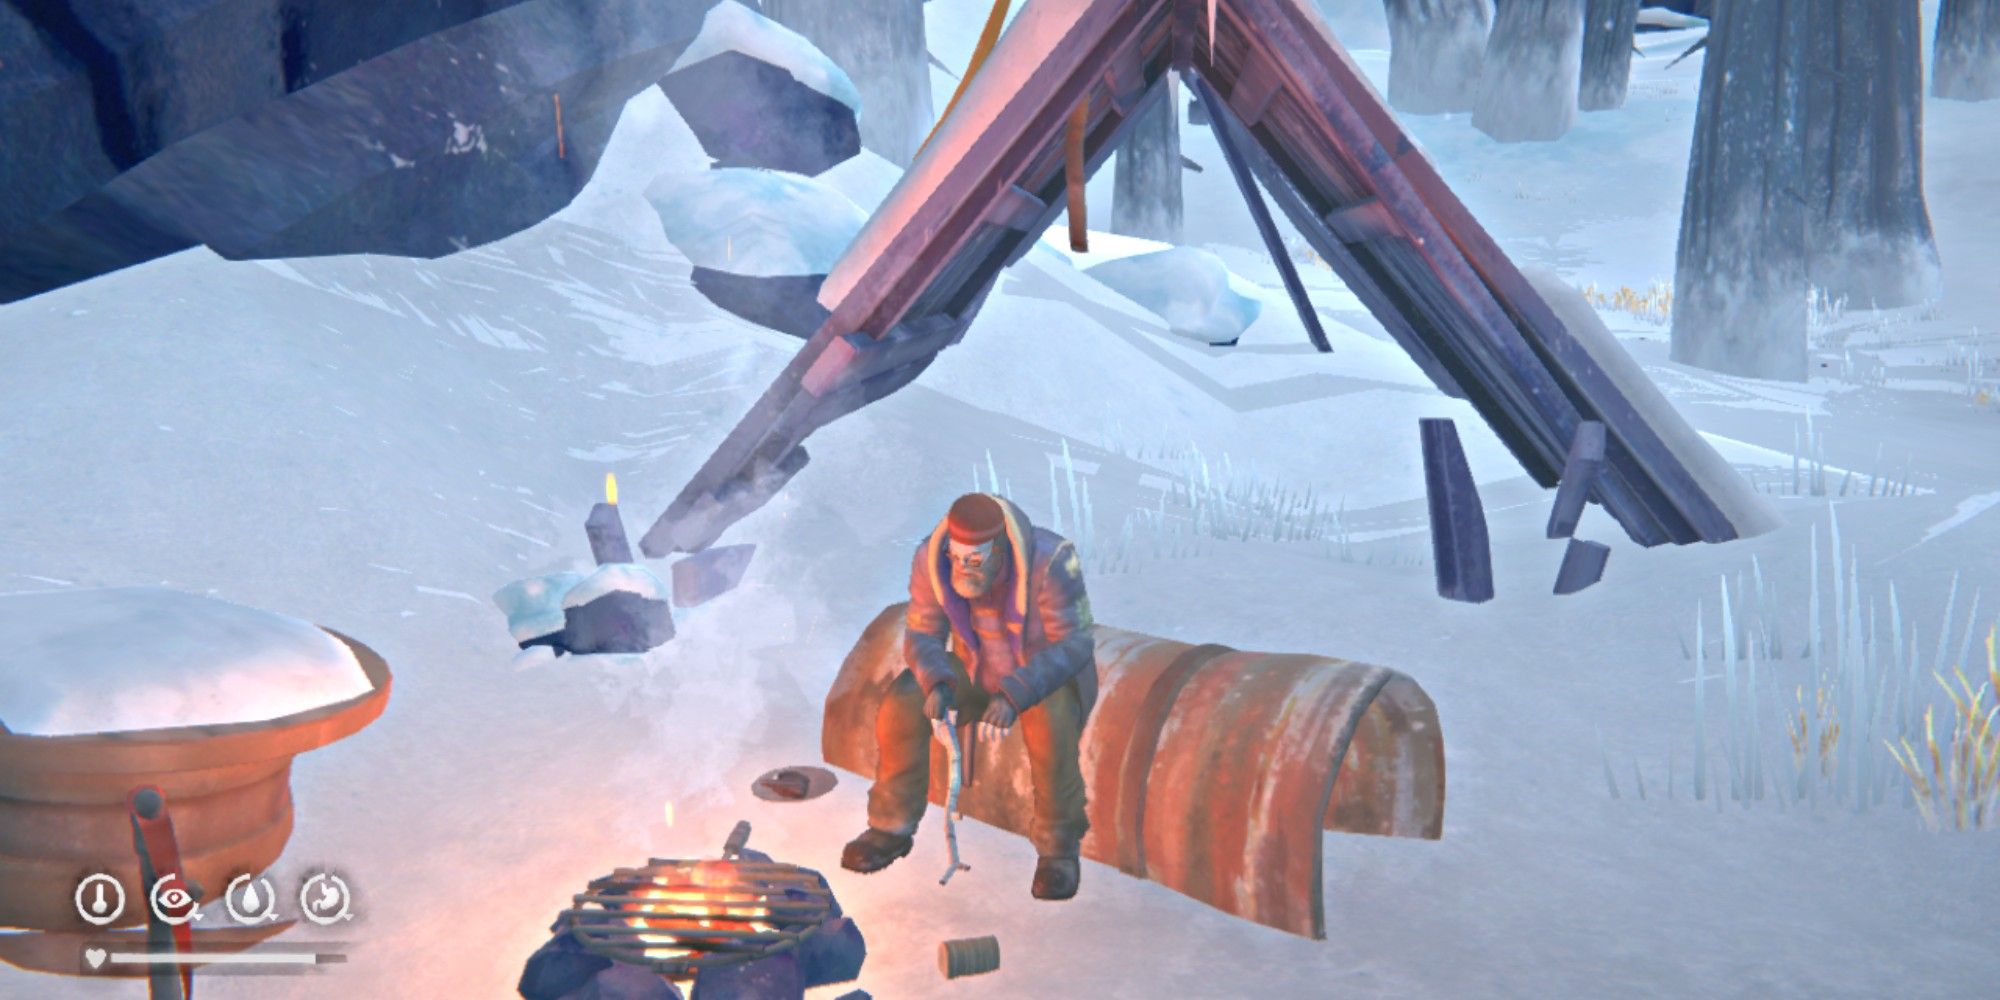 Does The Long Dark have a goal?